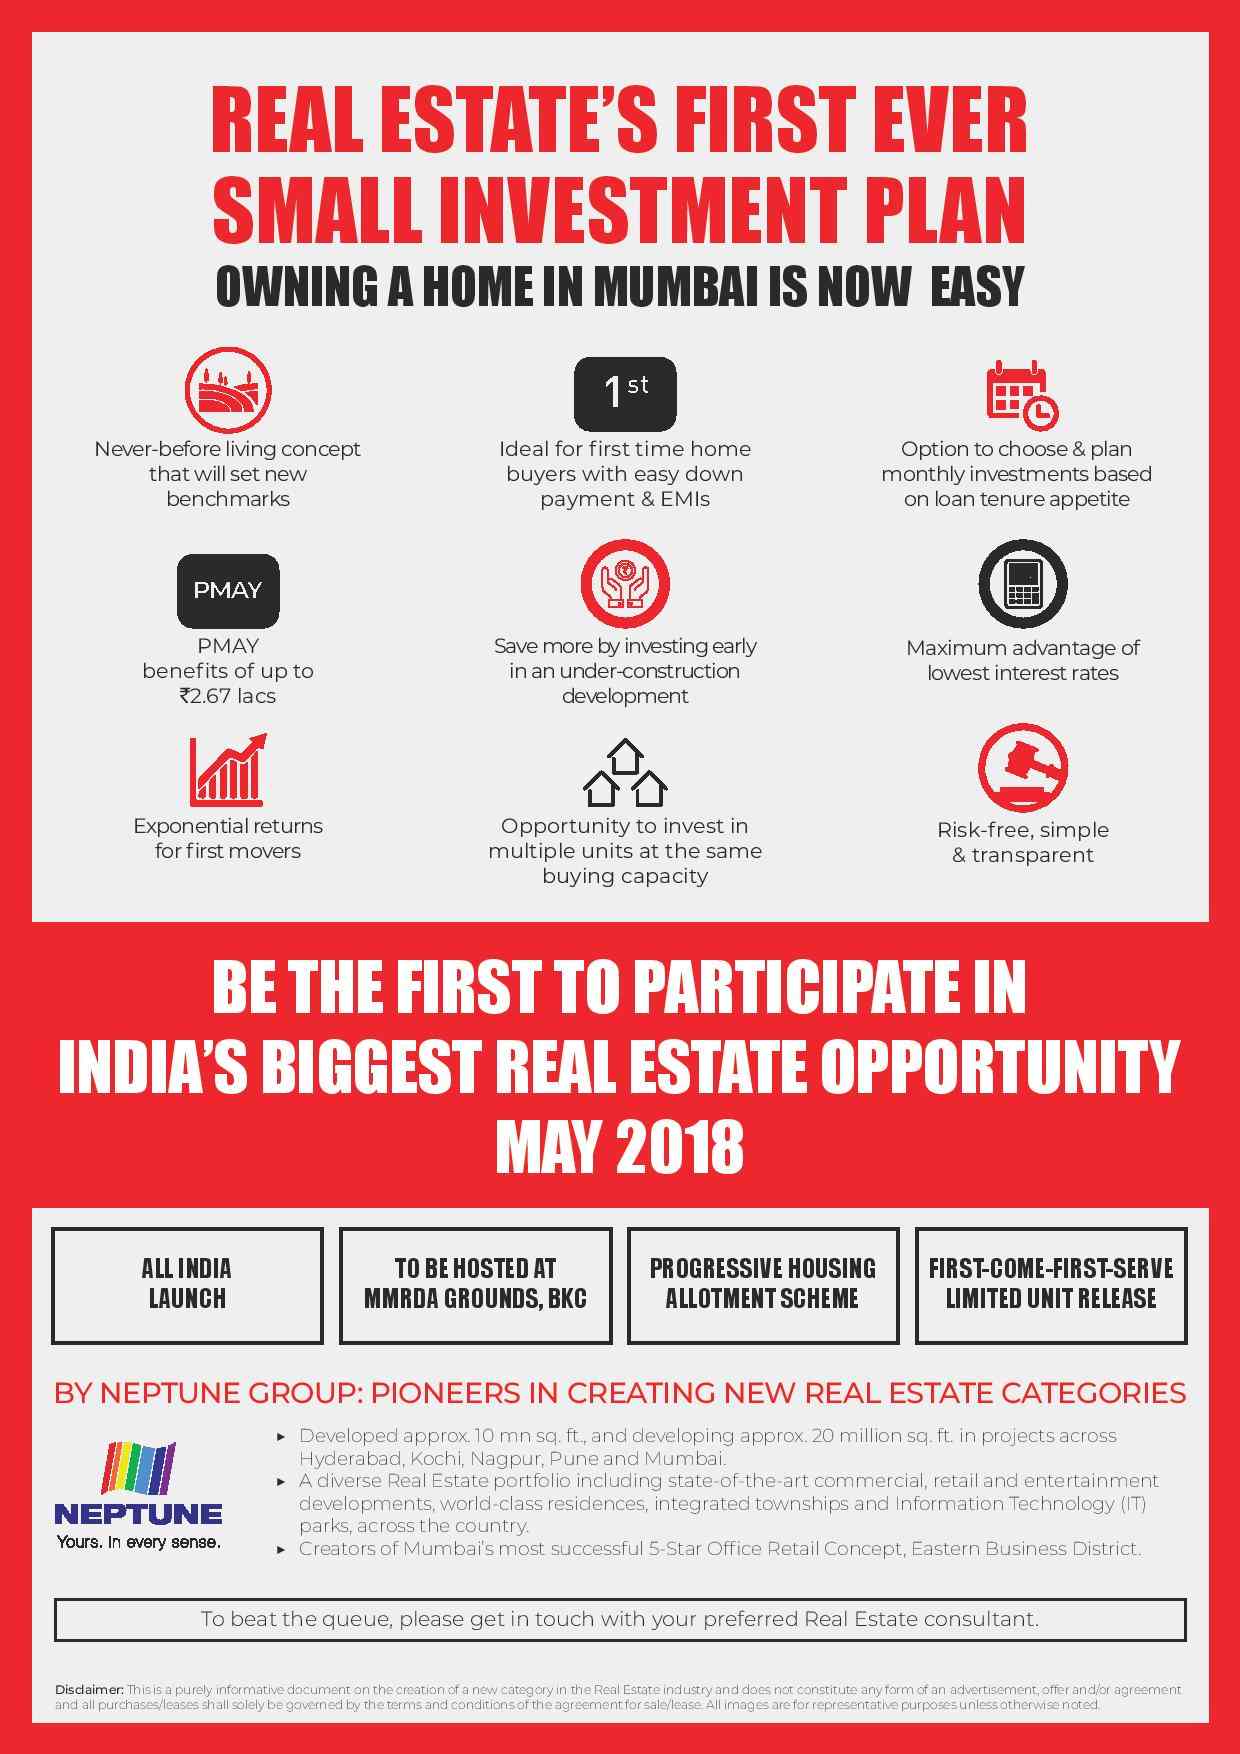 Be the first to participate in India's Biggest Real Estate Opportunity in May 2018 Update